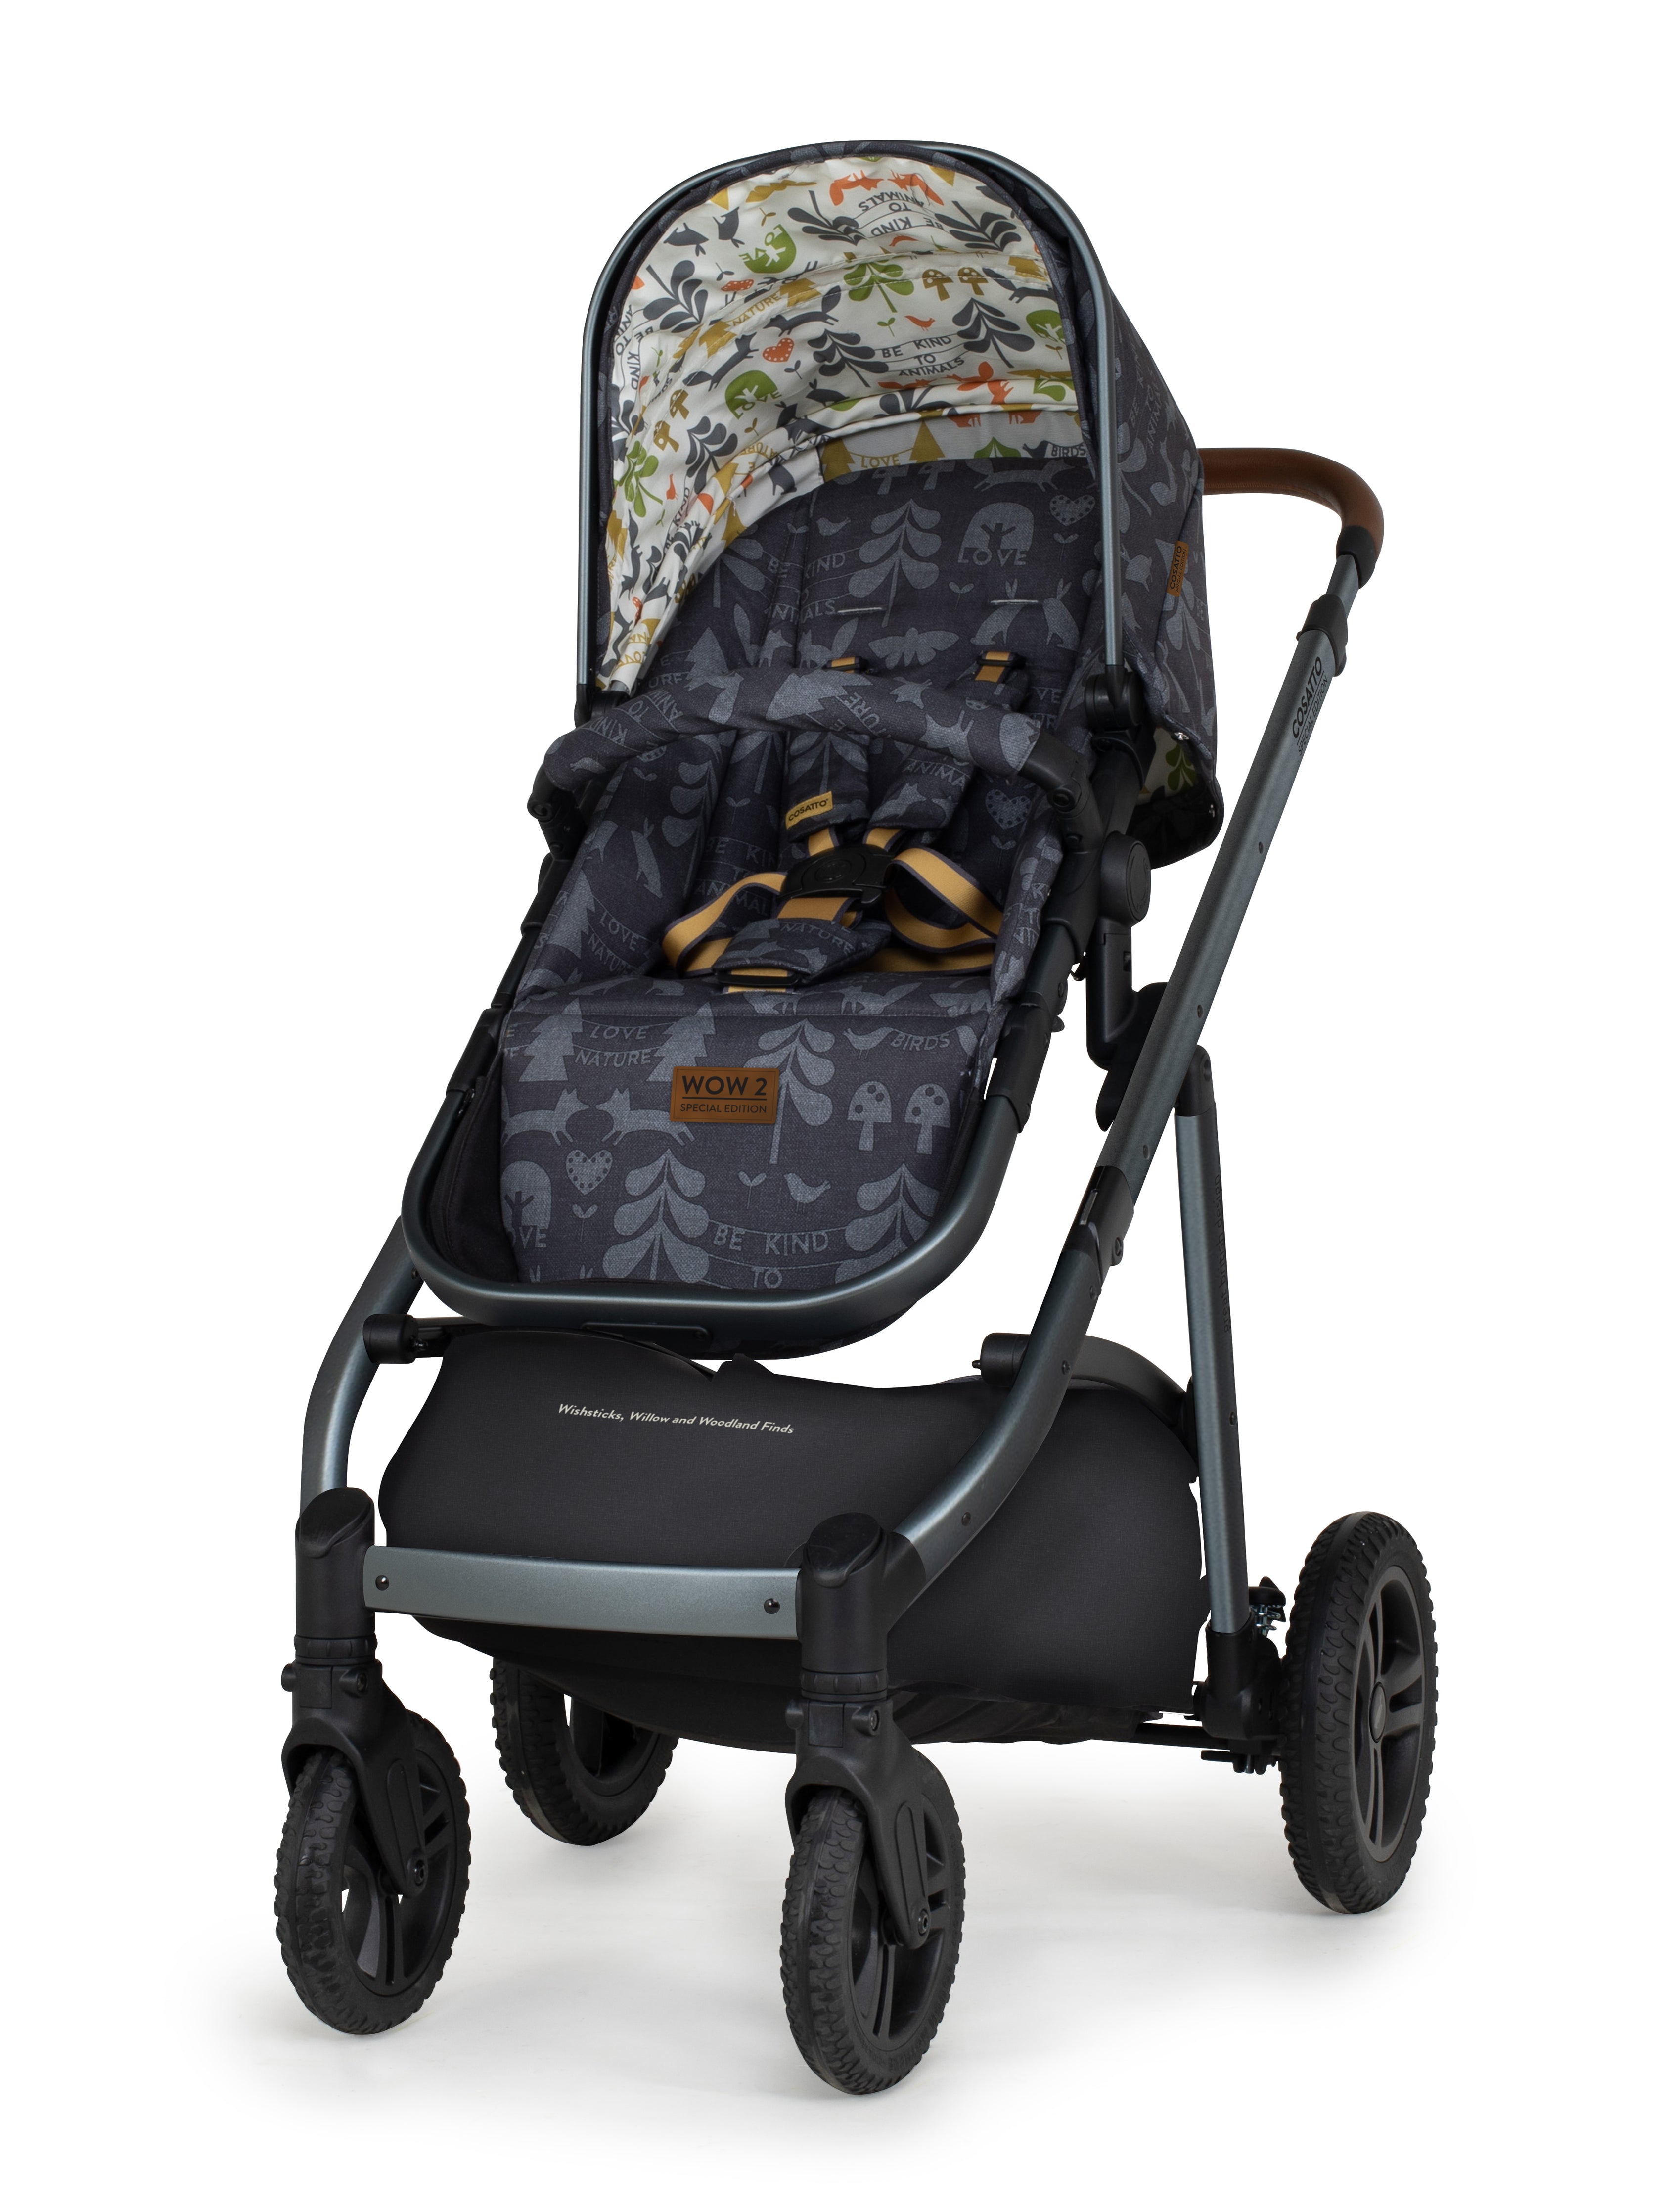 Wow 2 Special Edition Pram and Accessories Nature Trail Shadow